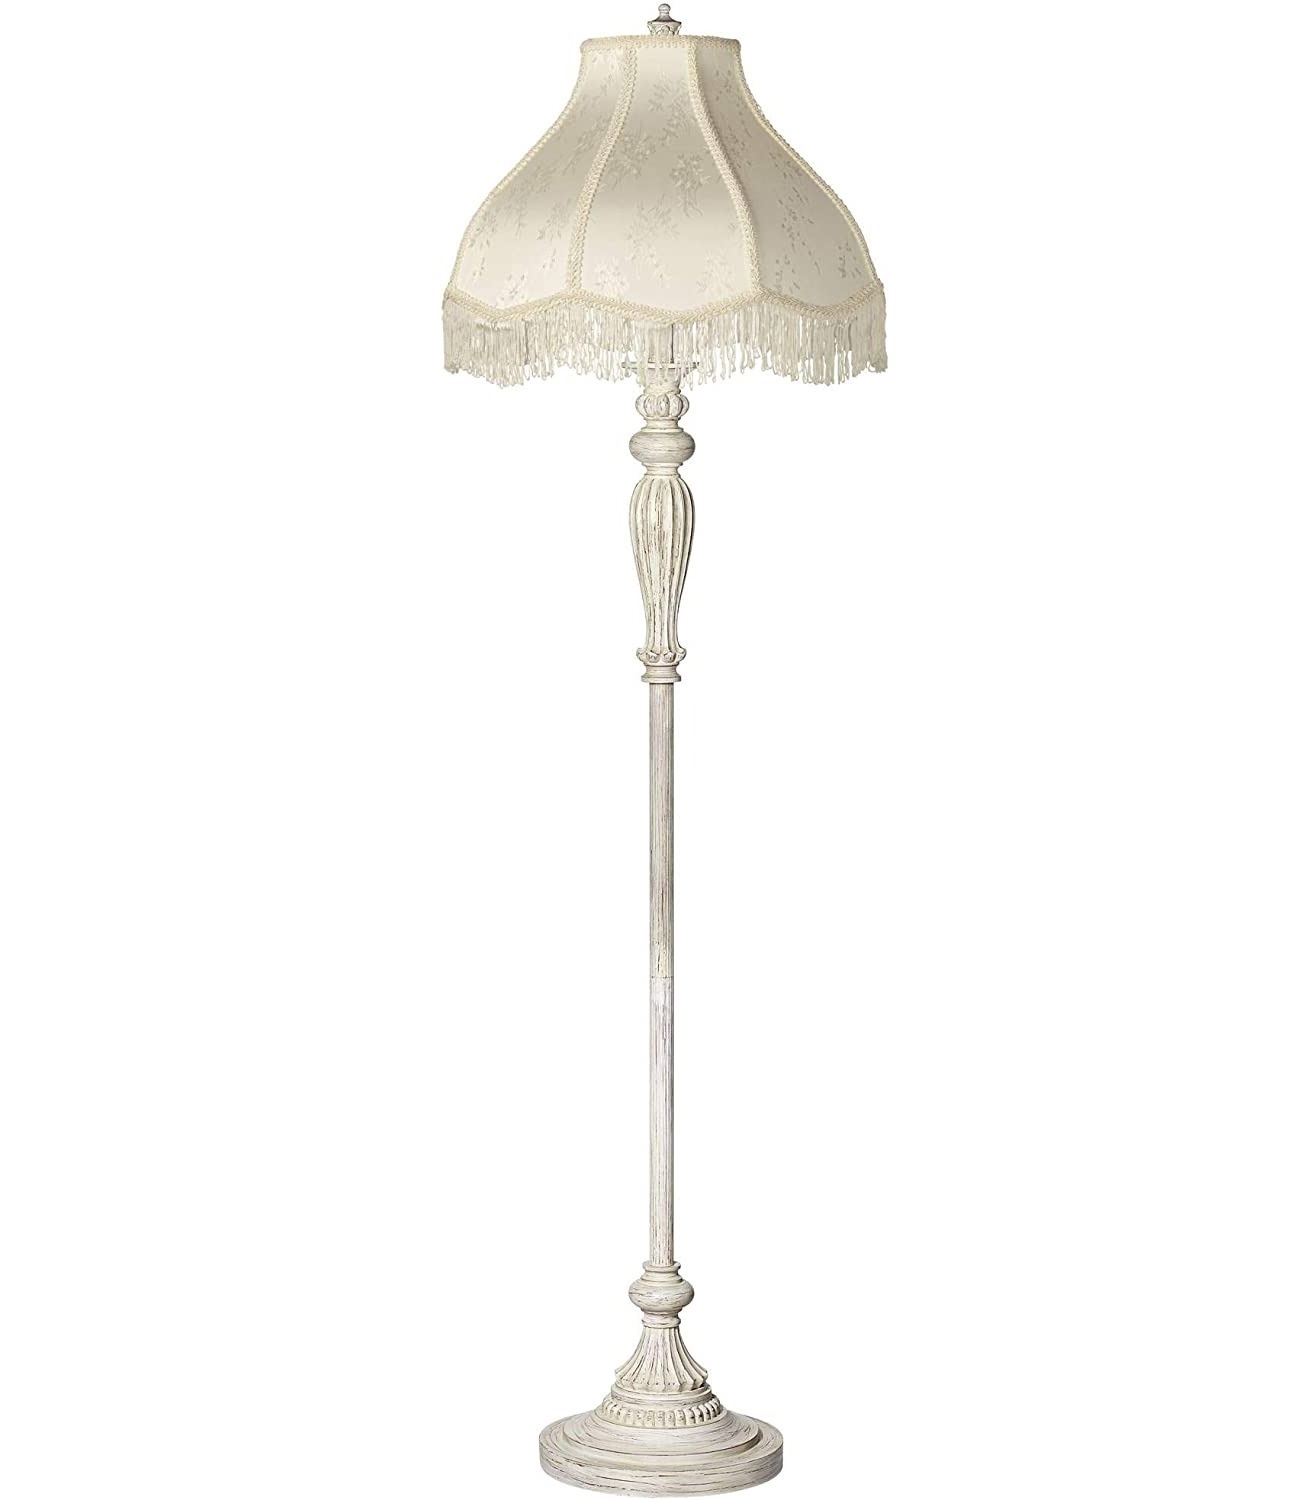 White Shabby Chic Floor Lamp with Dome Shade